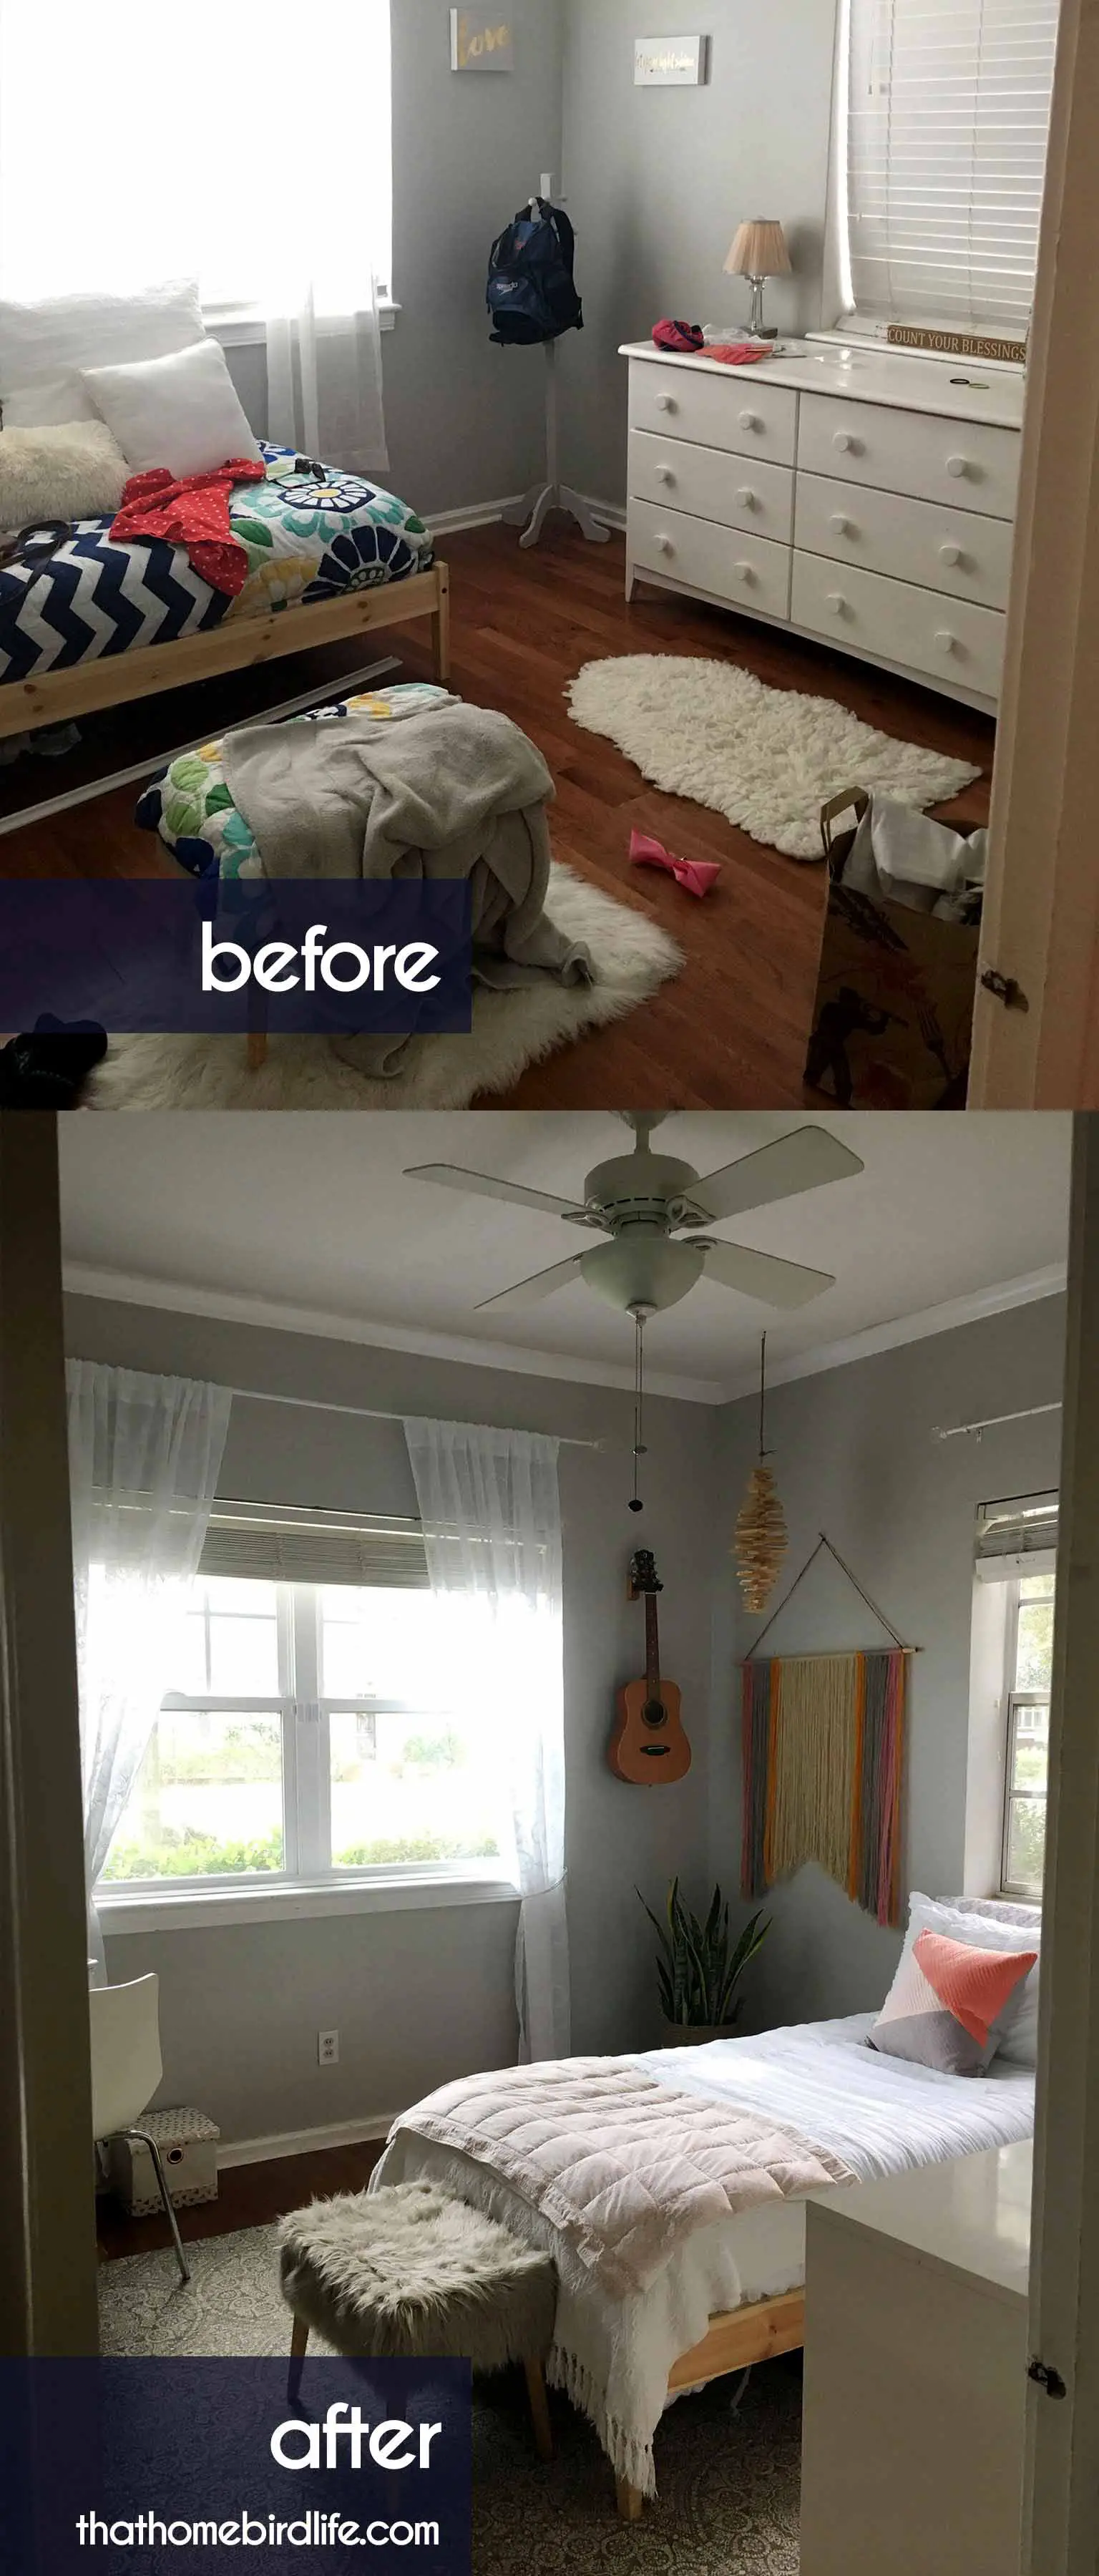 Before and after - A modern boho tween bedroom makeover on a budget - That Homebird Life Blog